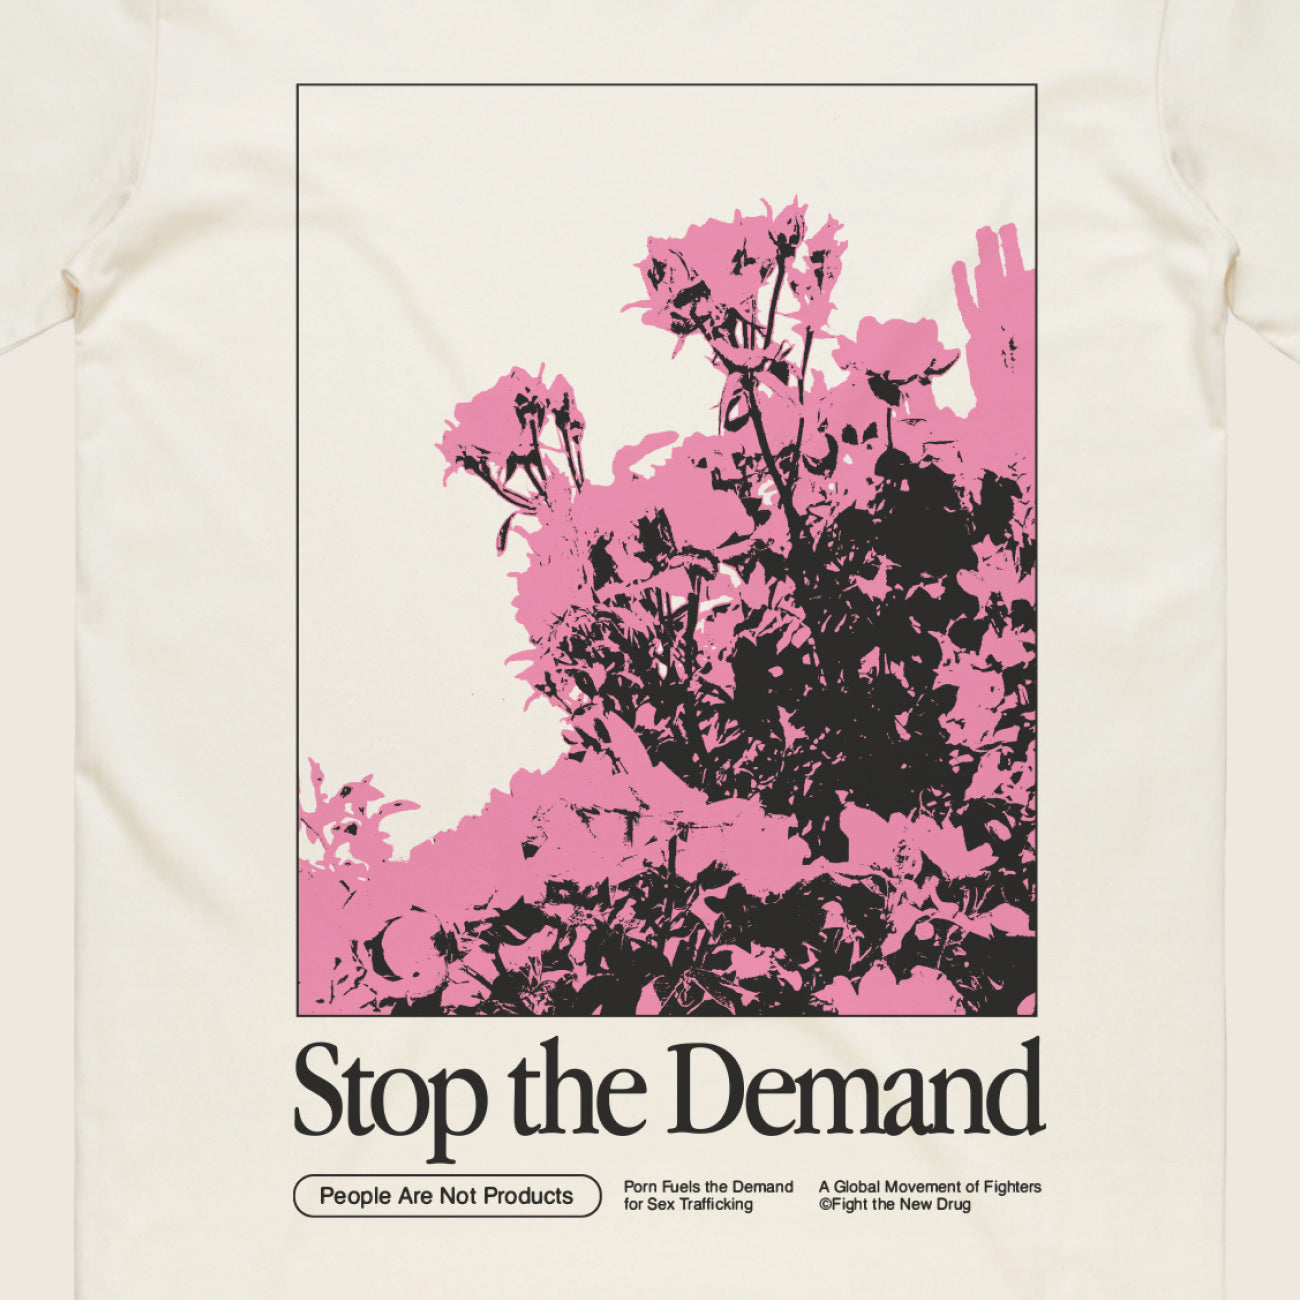 Stop The Demand Floral - Natural